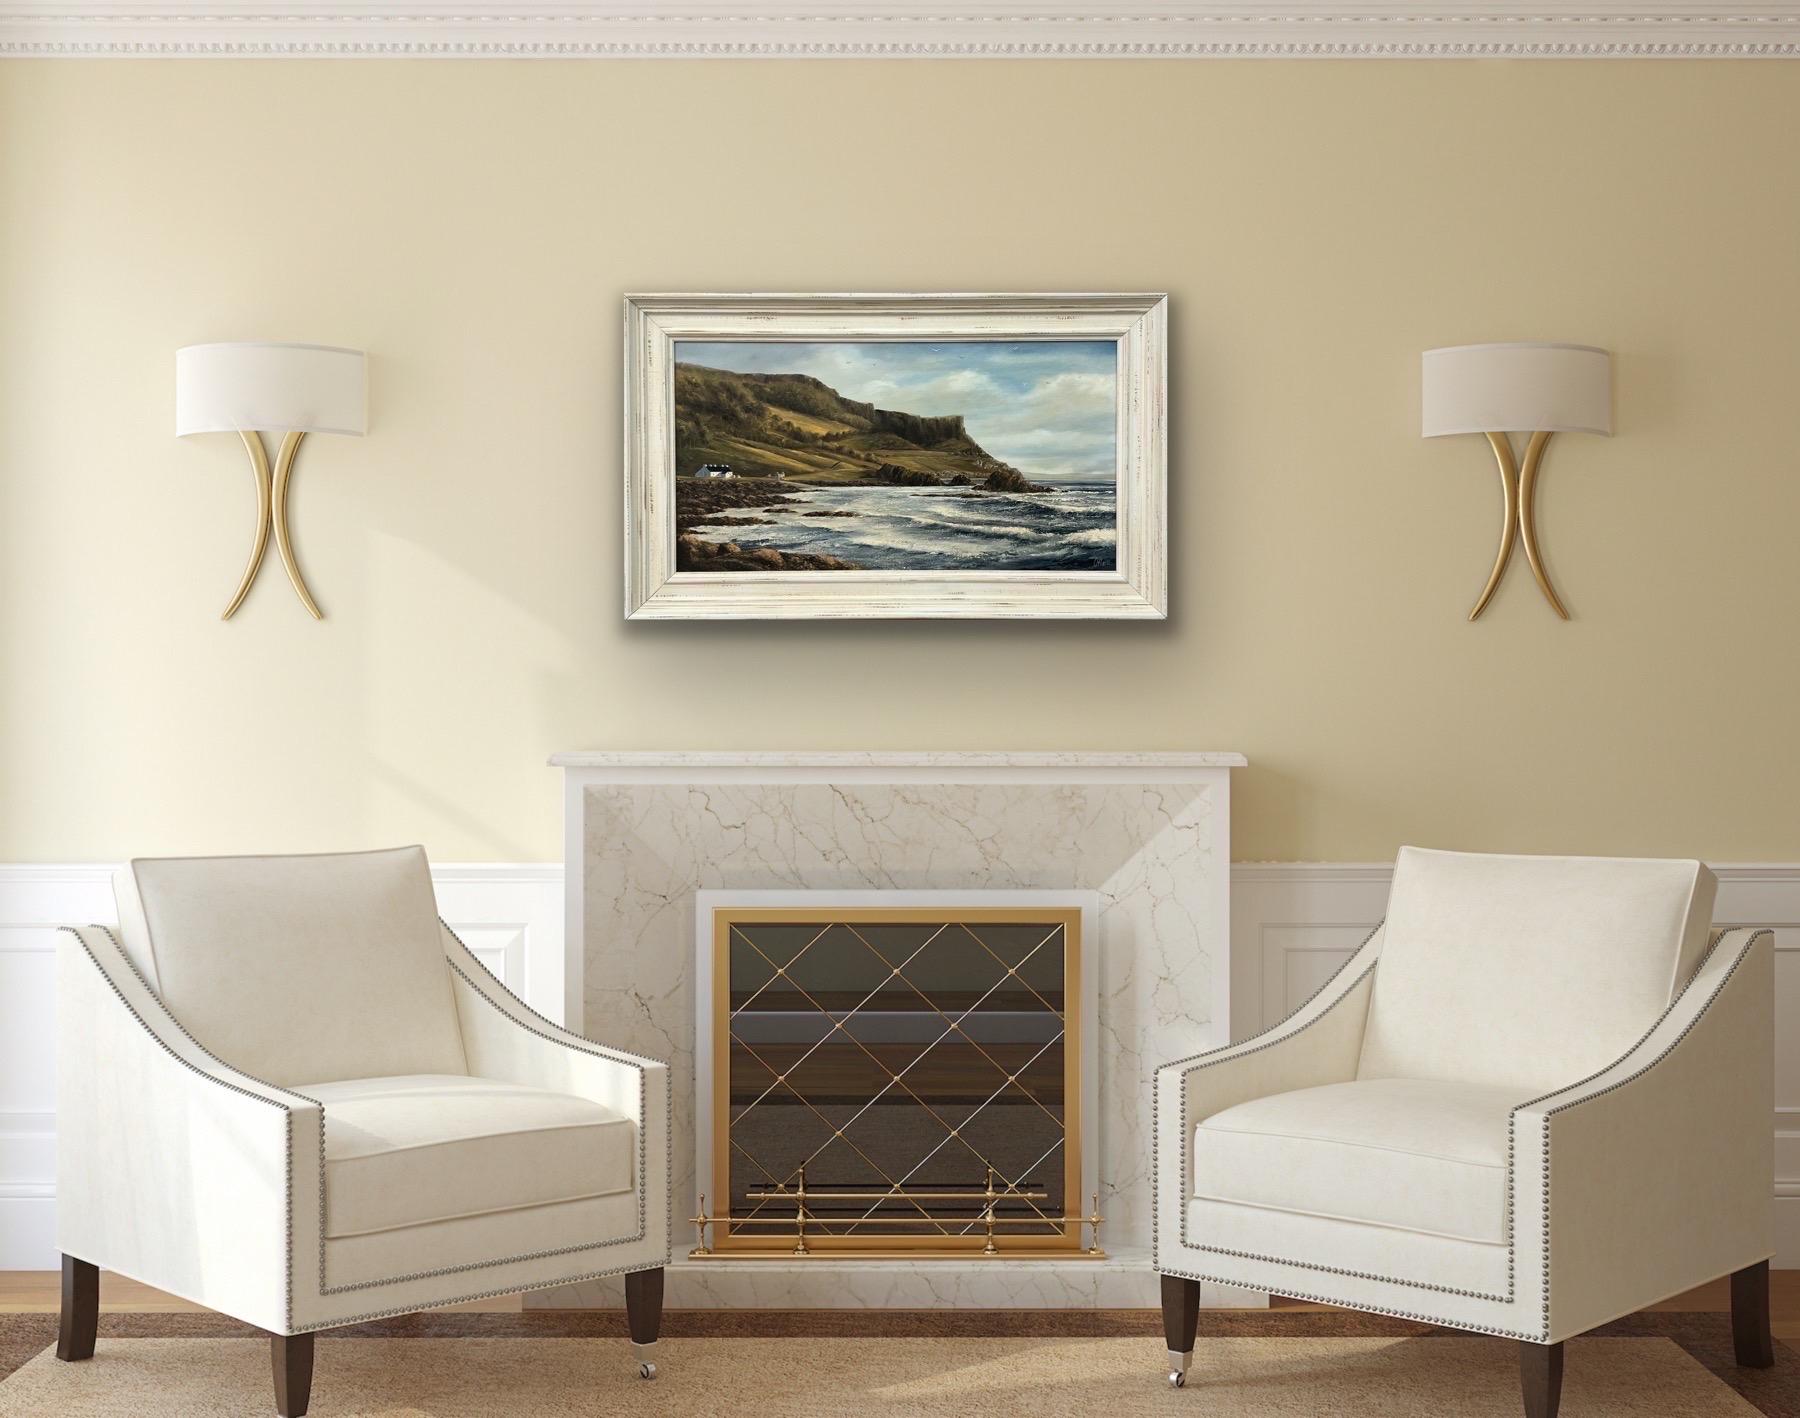 Atlantic Ocean Shoreline Seascape Painting of Causeway Coast in North Ireland by Irish Artist O'Hara 

Art measures 30 x 16 inches 
Frame measures 36 x 22 inches 

Presented in a high quality off-white shabby chic frame. Excellent condition.

This